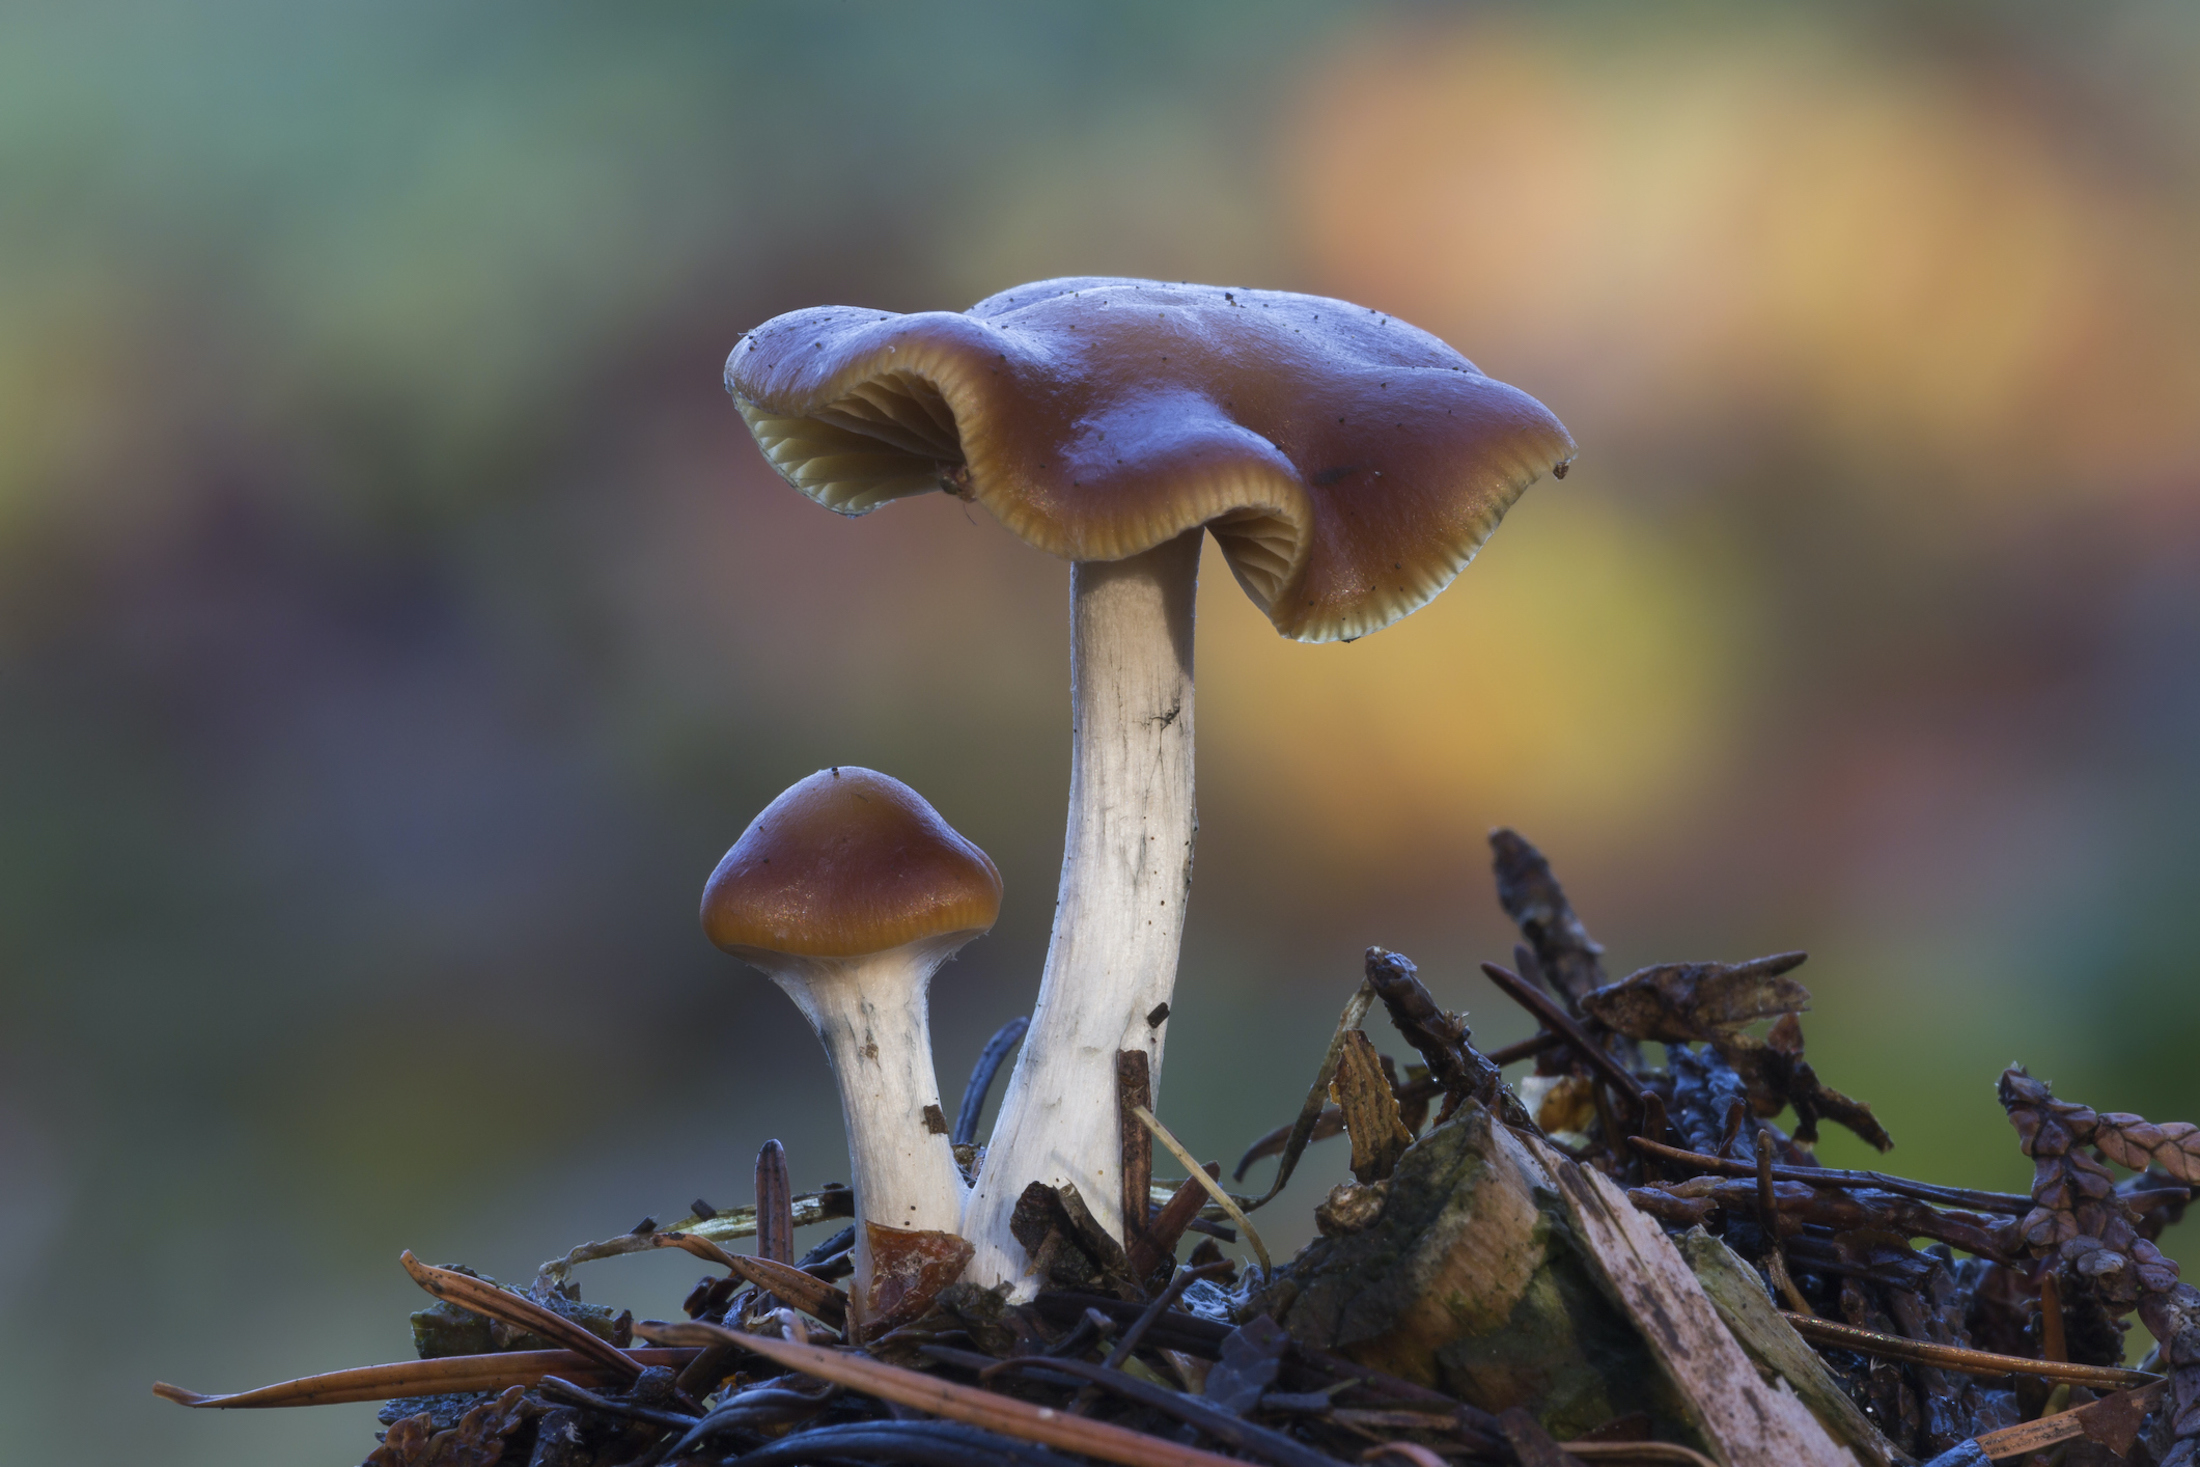 Decoding Potency: Factors Influencing the Strength and Quality of Magic Mushrooms